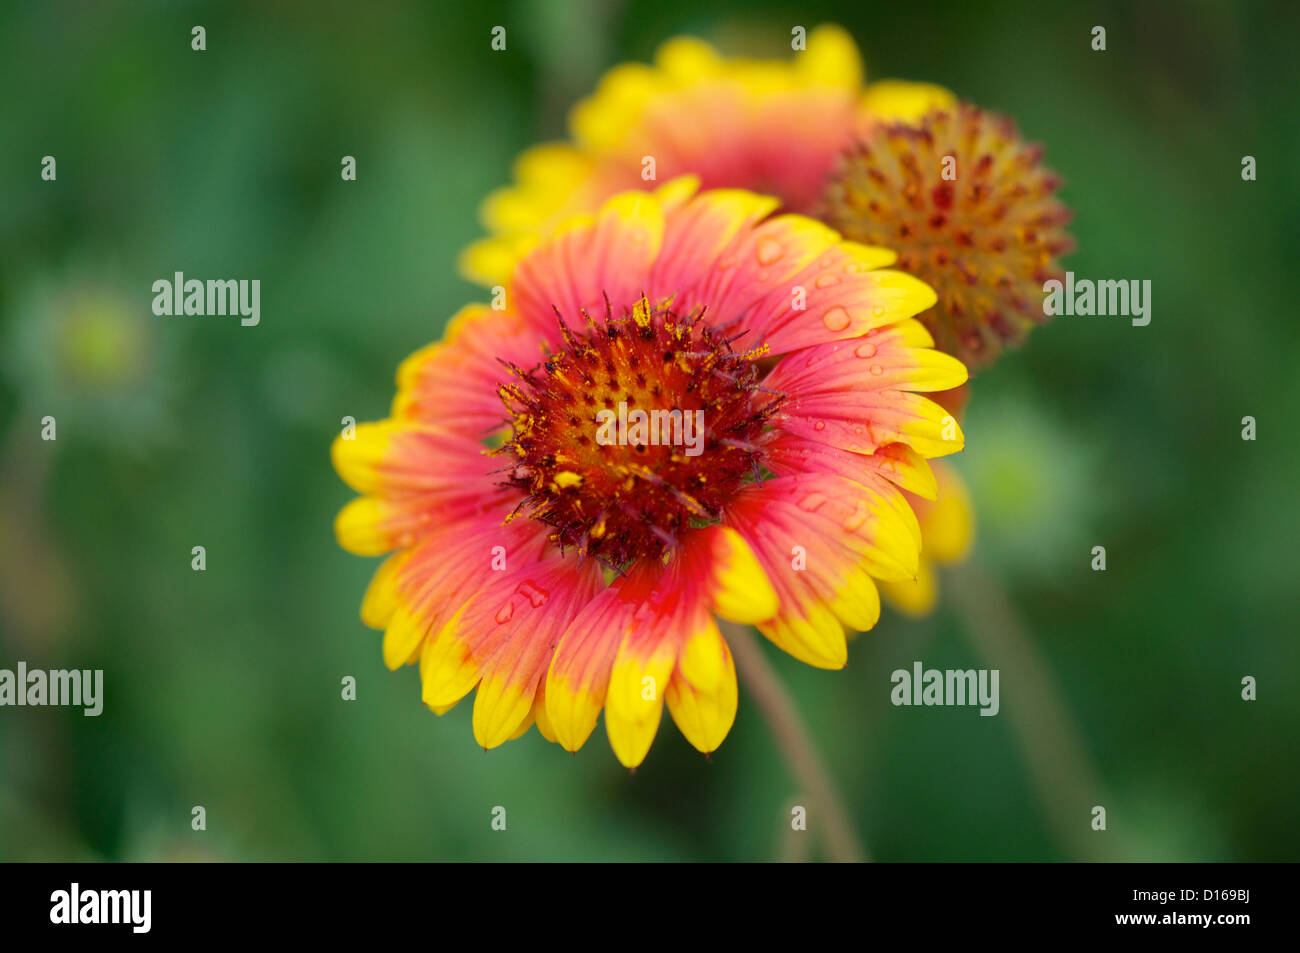 Flowers bed with various daisy, digitalis, and other autumn flowers, beautiful and colorful.  Stock Photo